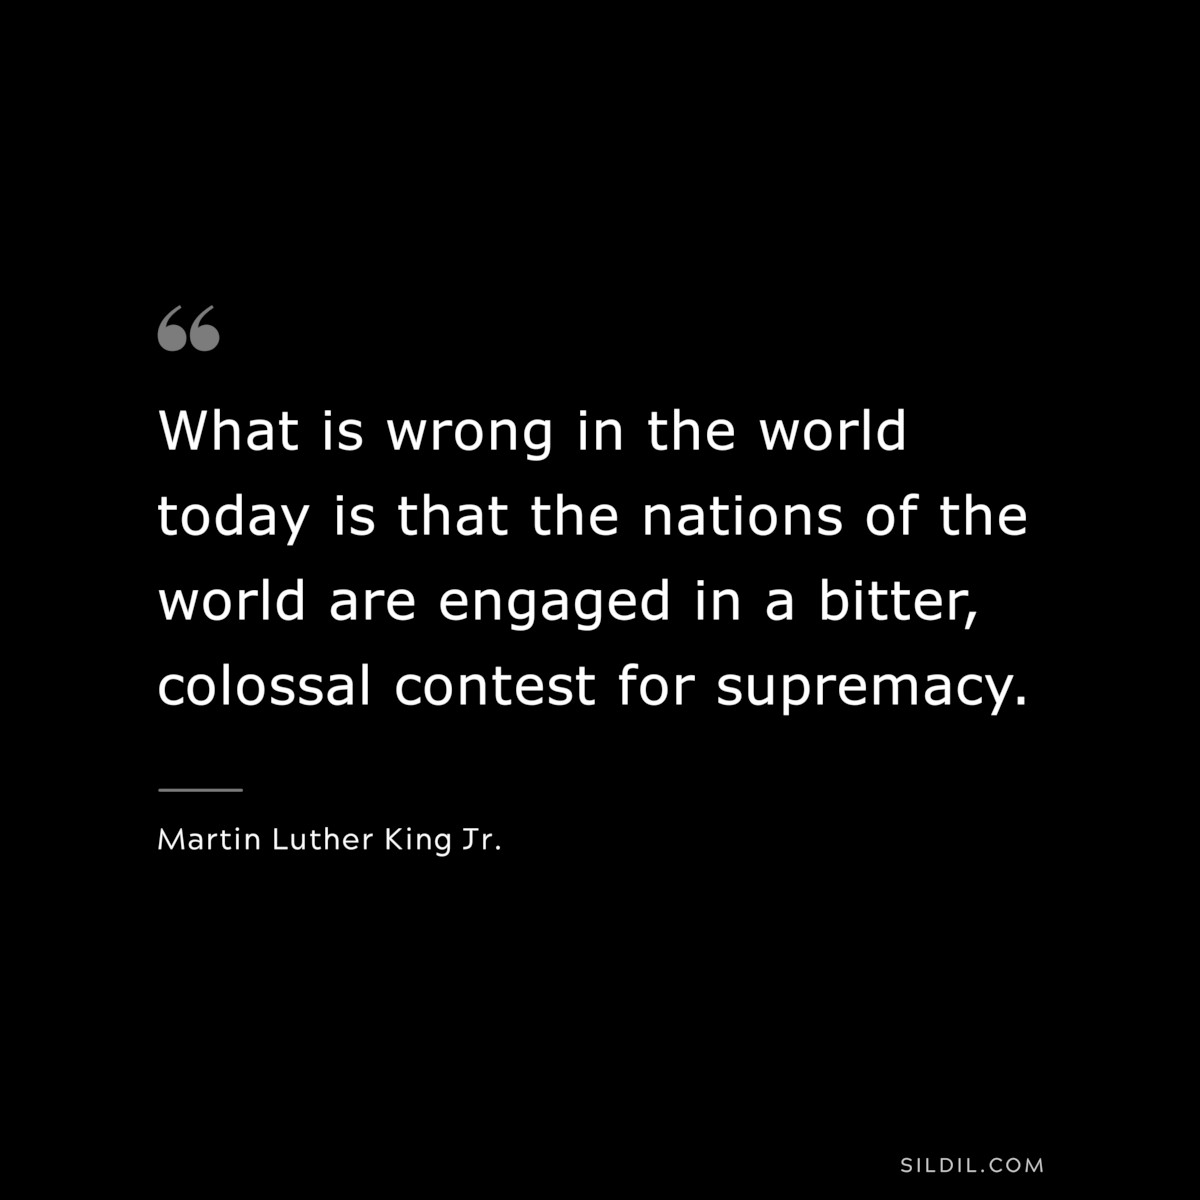 What is wrong in the world today is that the nations of the world are engaged in a bitter, colossal contest for supremacy. ― Martin Luther King Jr.